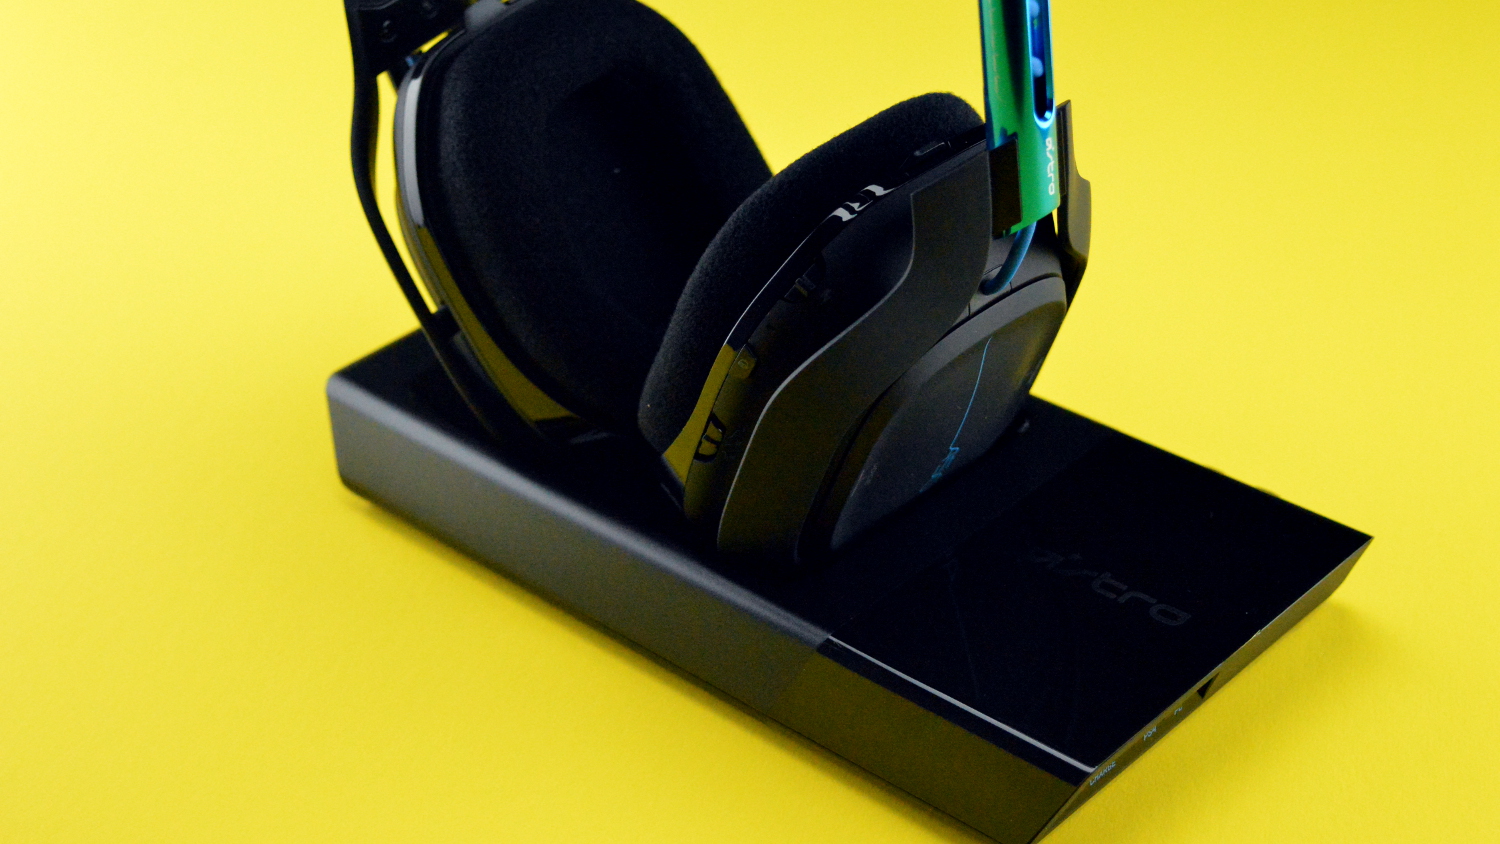 Astro A50 Wireless Headset+Base Station Review